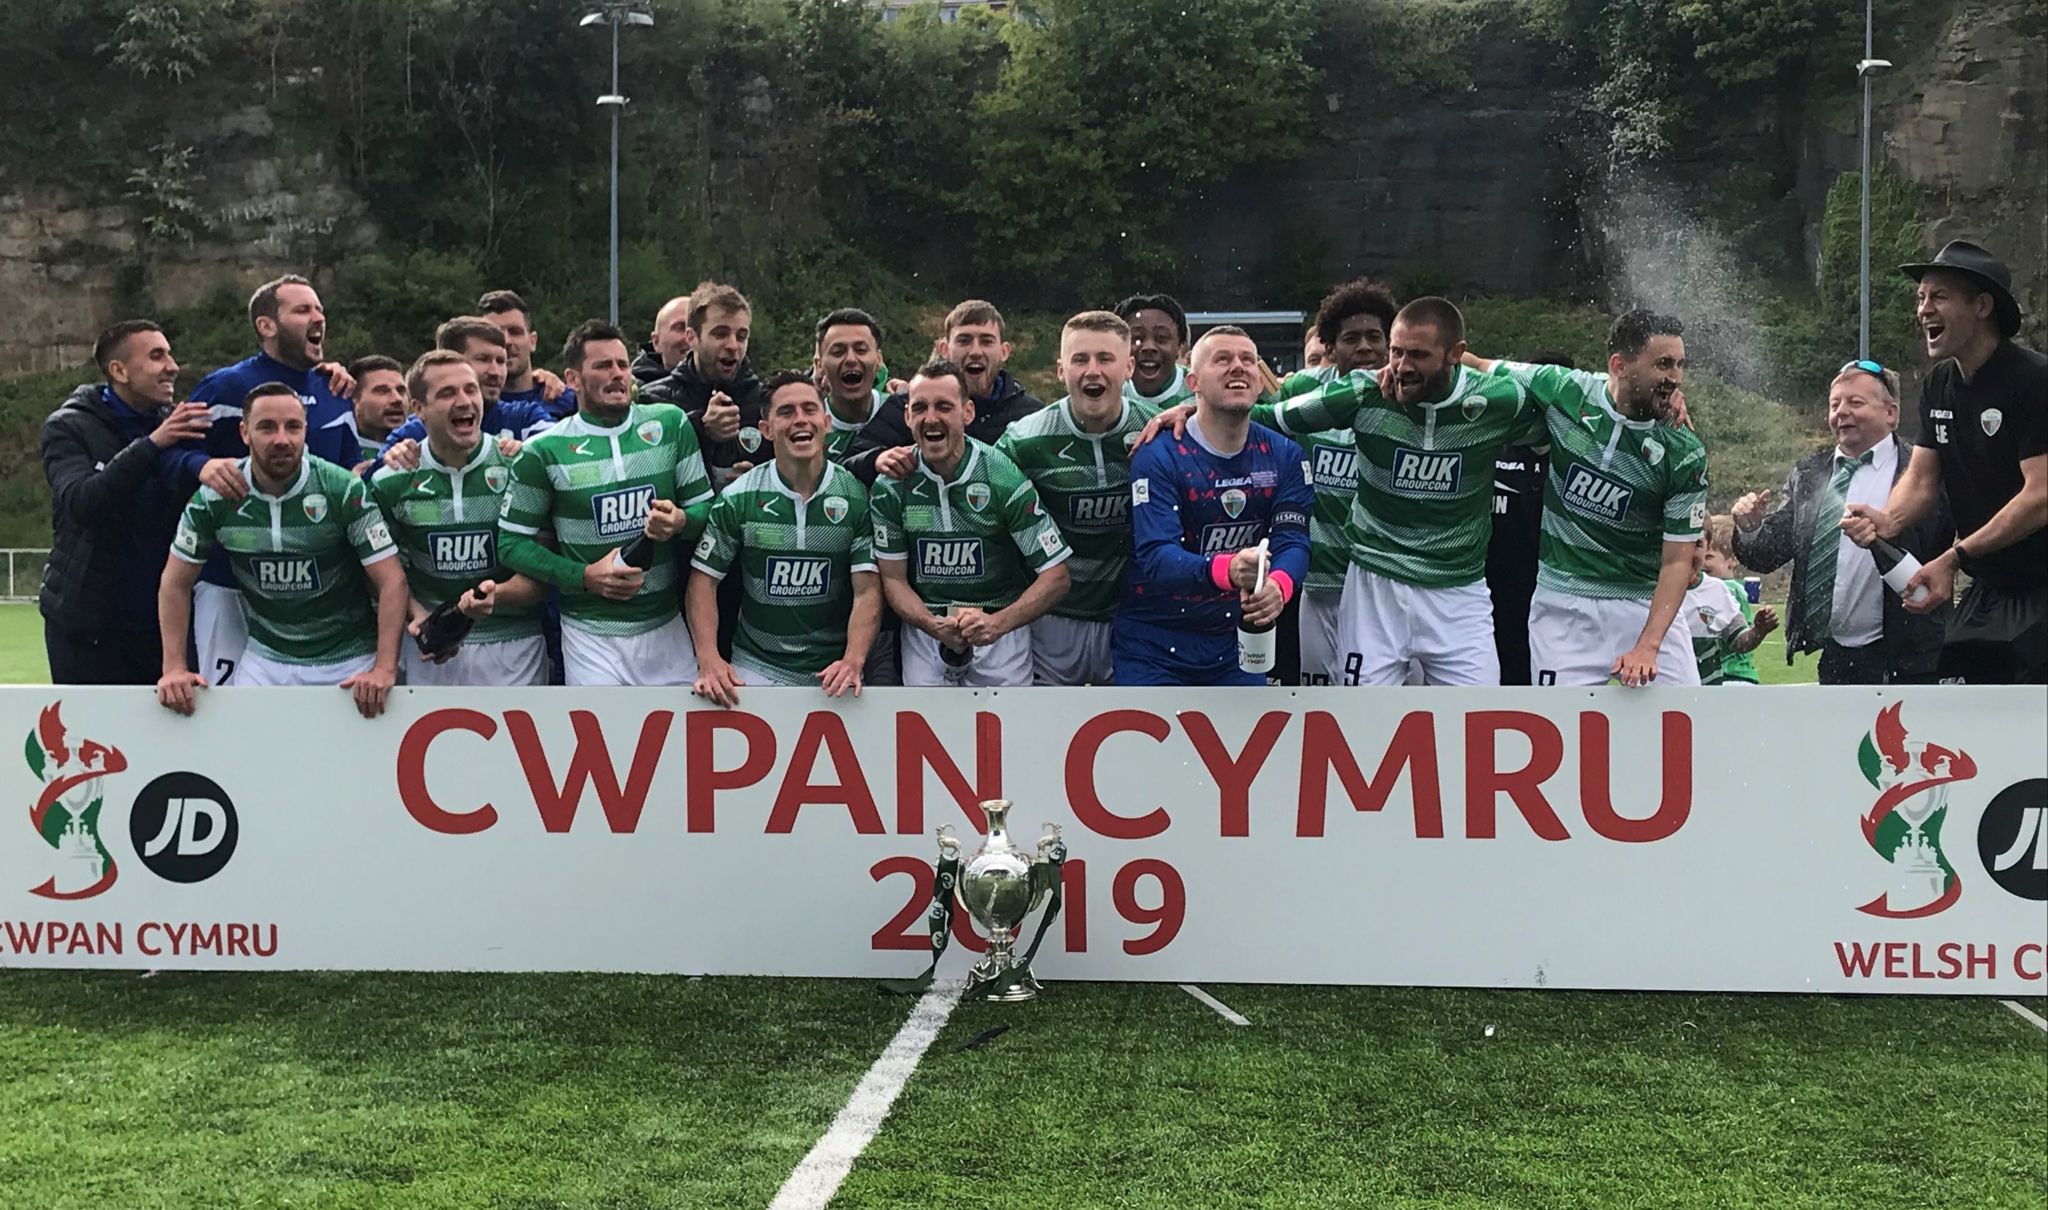 New Saints celebrate their win over Connah's Quay in the 2019 final